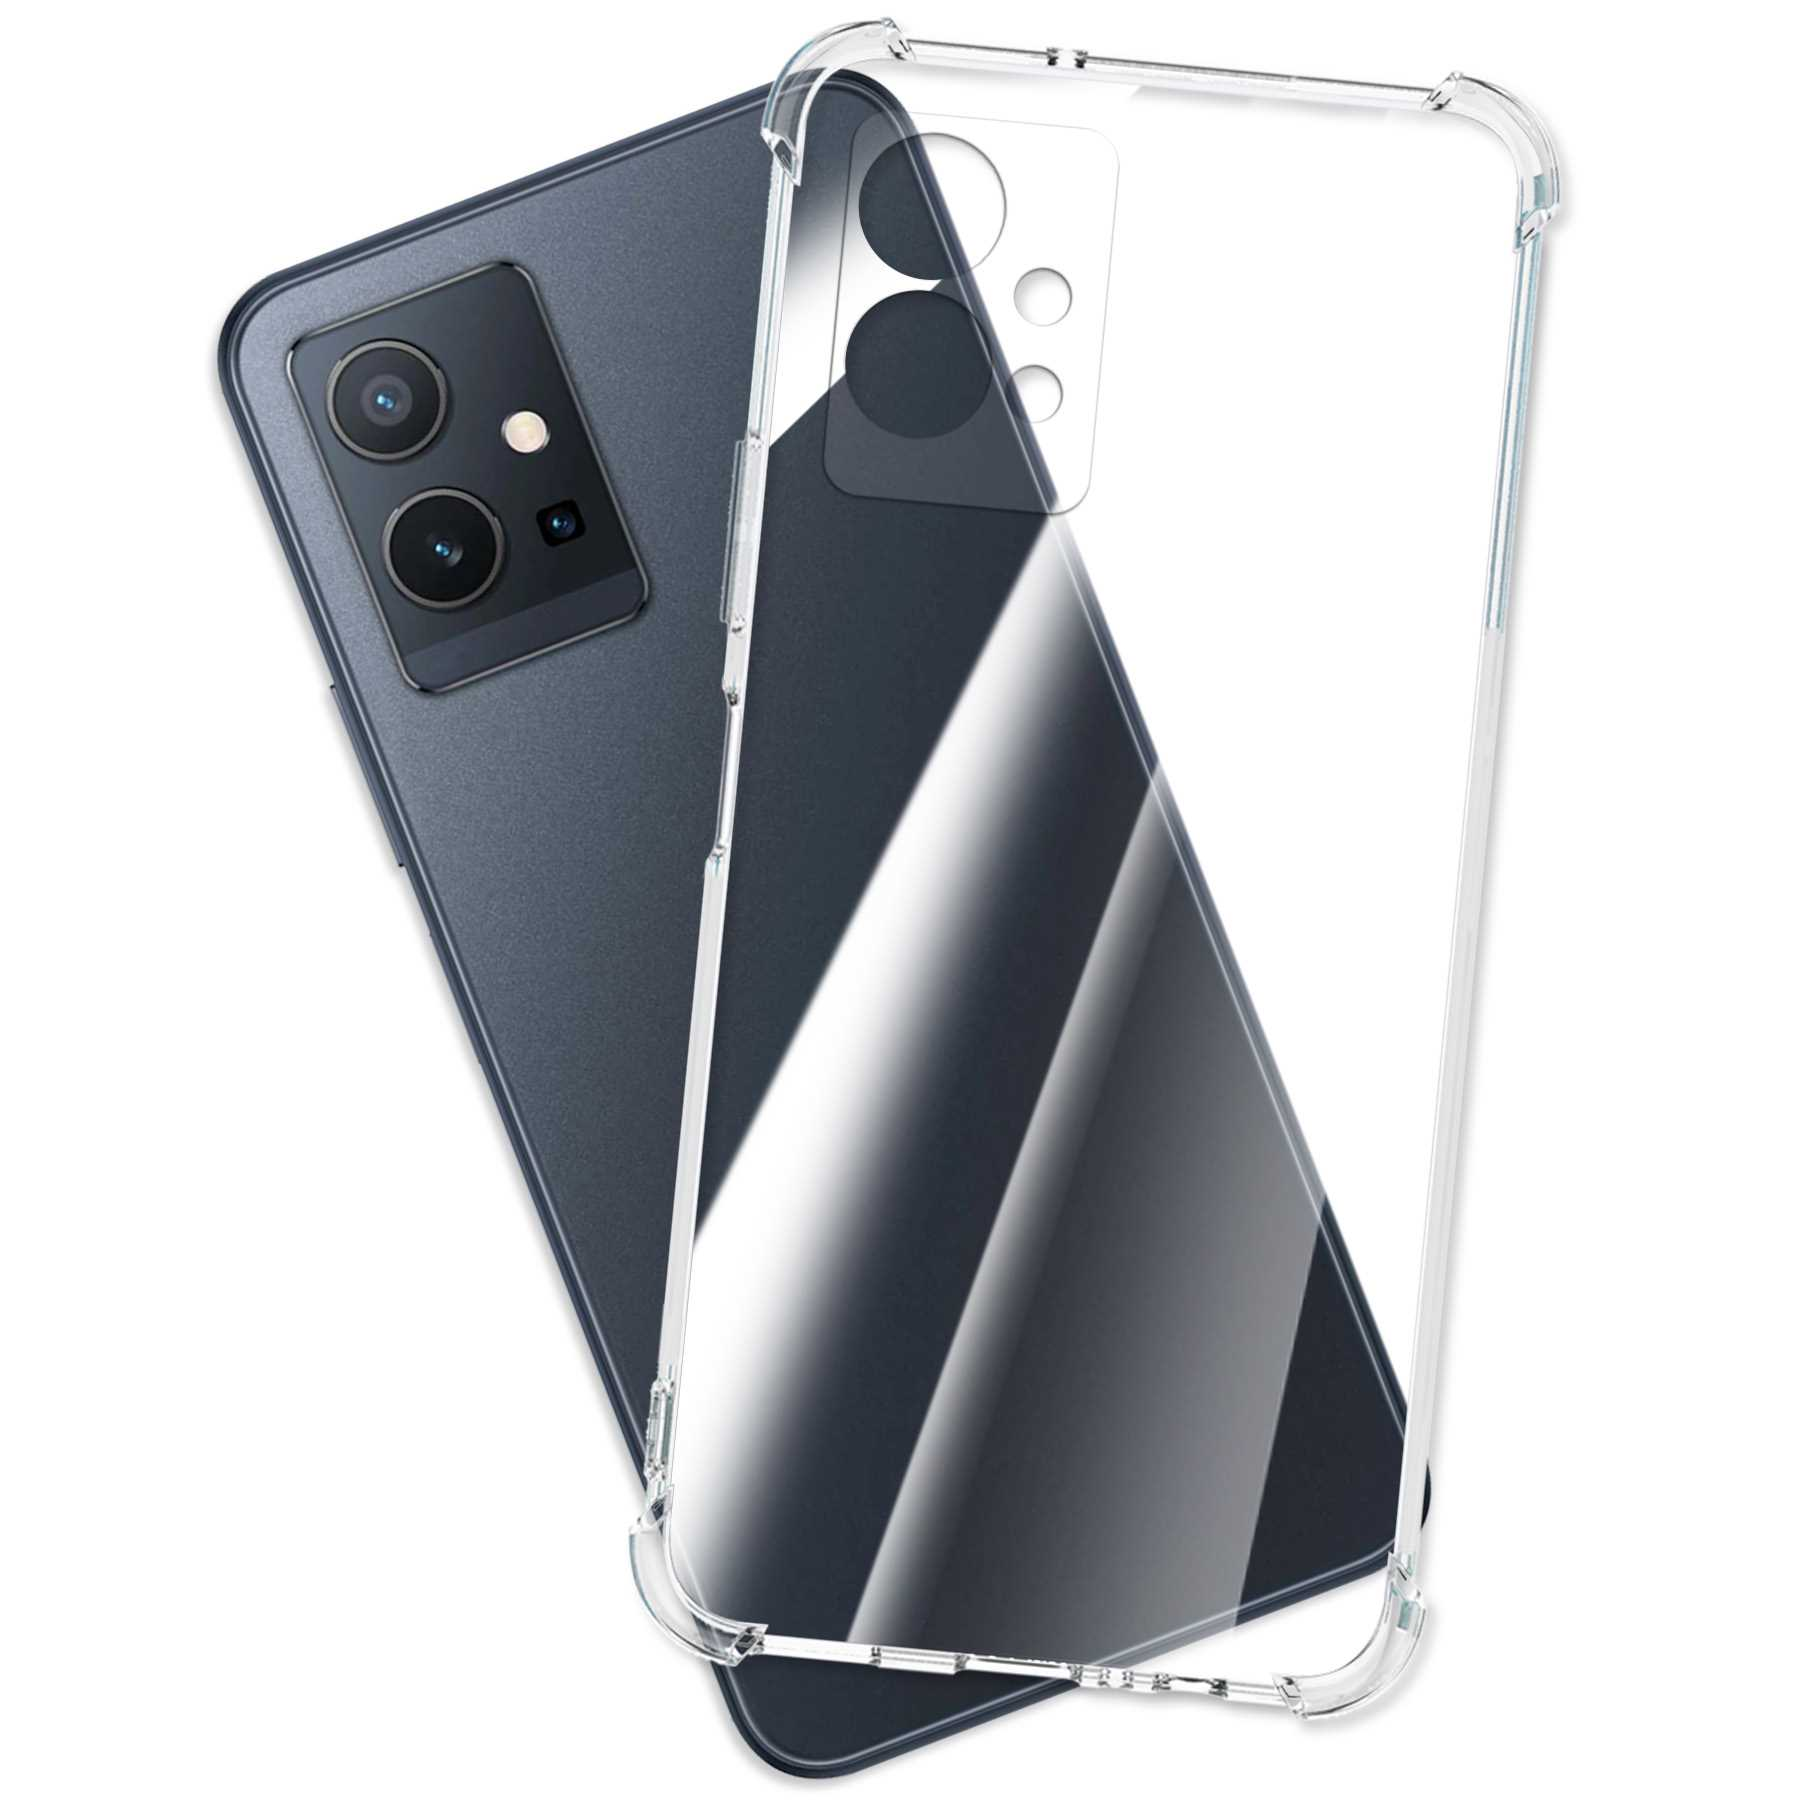 MTB MORE ENERGY 5G, Case, 5G, Y75 vivo, Transparent Clear Armor Y55 Backcover